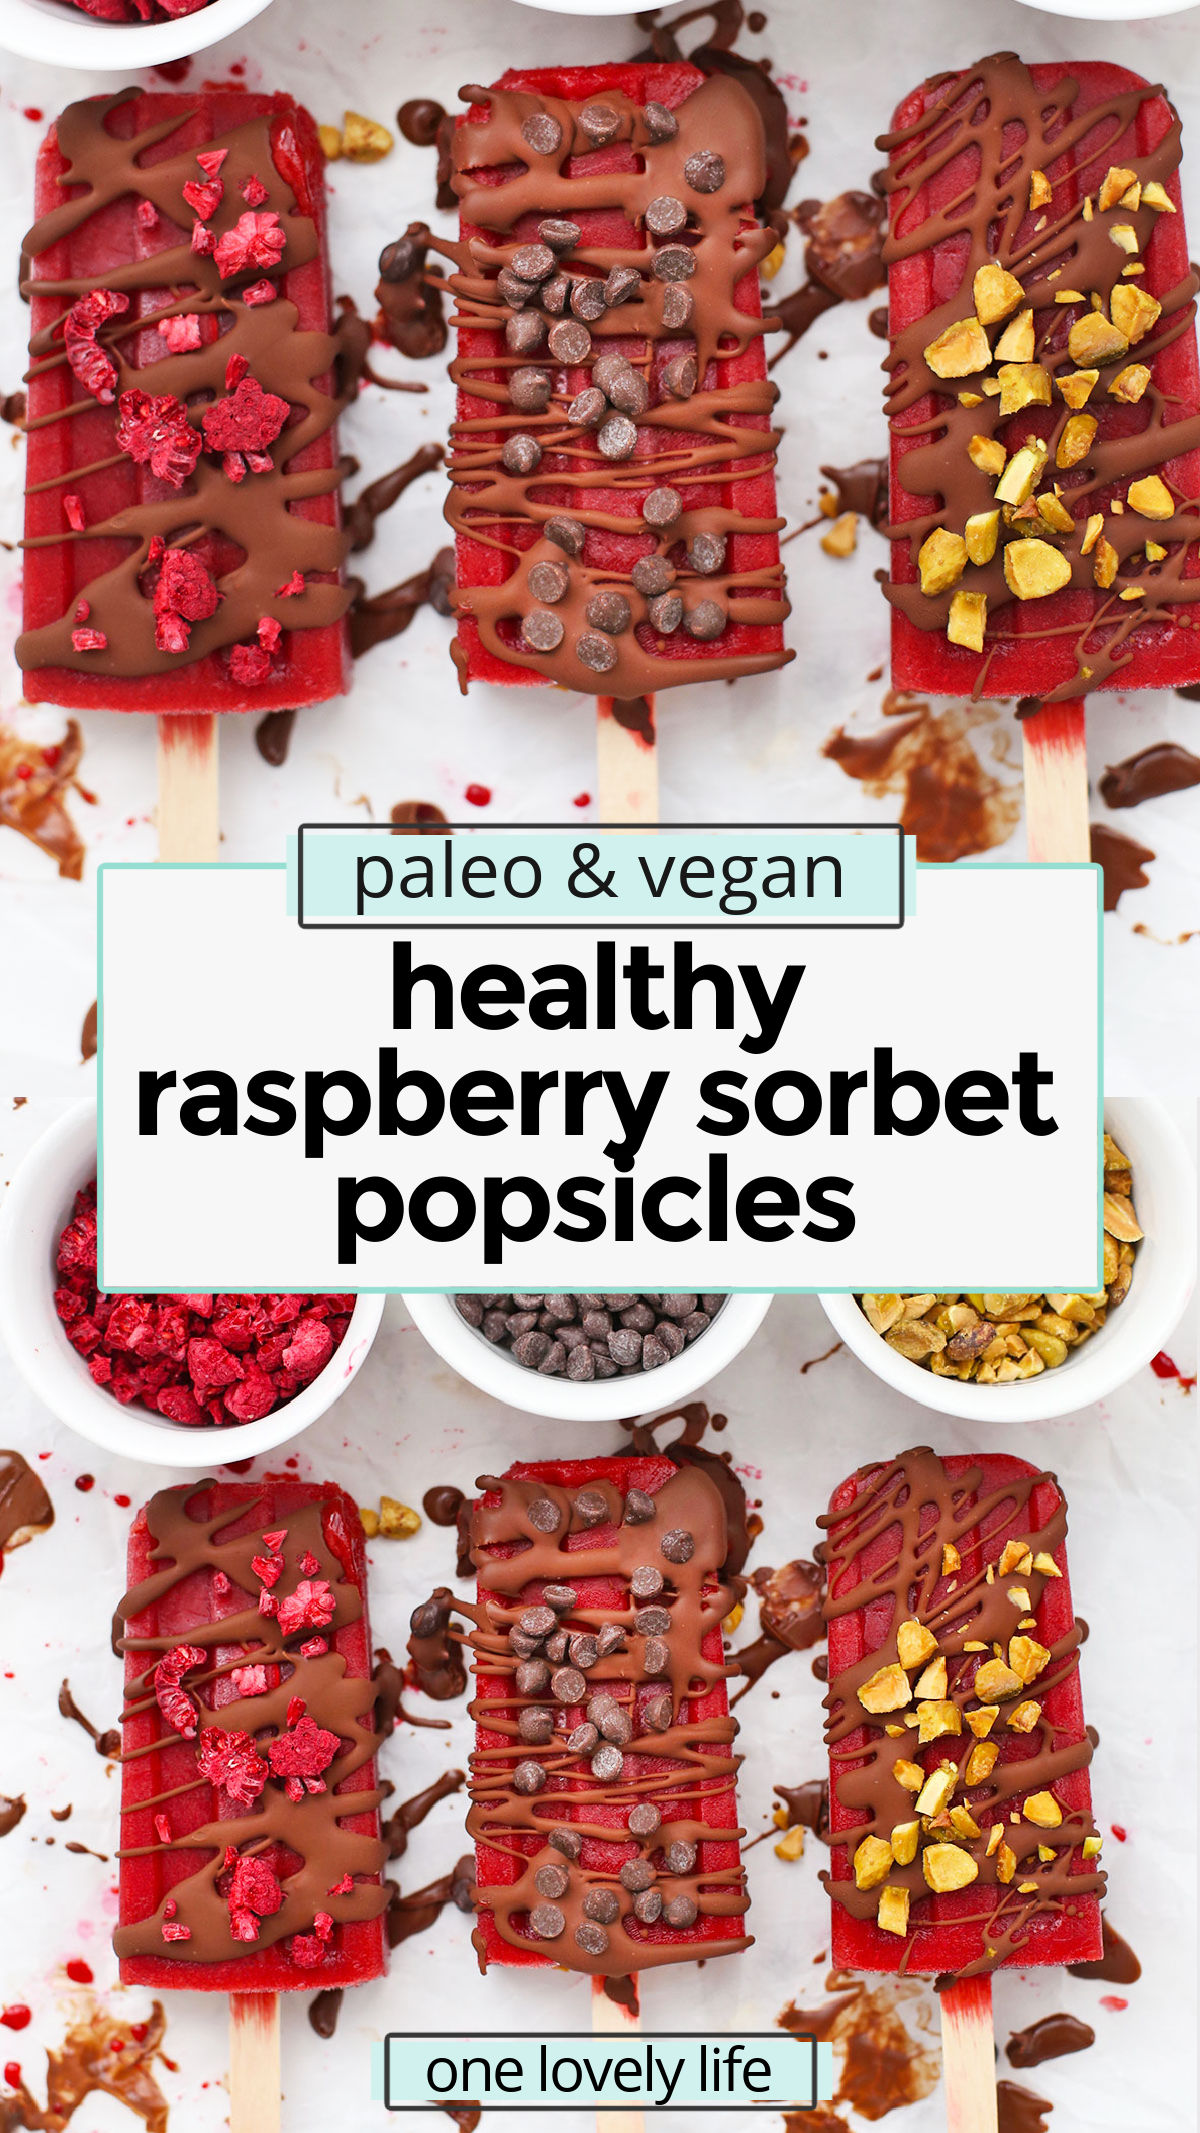 Healthy Raspberry Sorbet Popsicles - These raspberry popsicles taste like a scoop of sorbet. Don't skip the chocolate drizzle! (Paleo, Vegan) // Raspberry Popsicle recipe // healthy raspberry popsicles // healthy popsicles // homemade popsicles // homemade raspberry popsicles // healthy raspberry sorbet / vegan popsicles / paleo popsicles / gluten-free popsicles / vegetarian popsicles